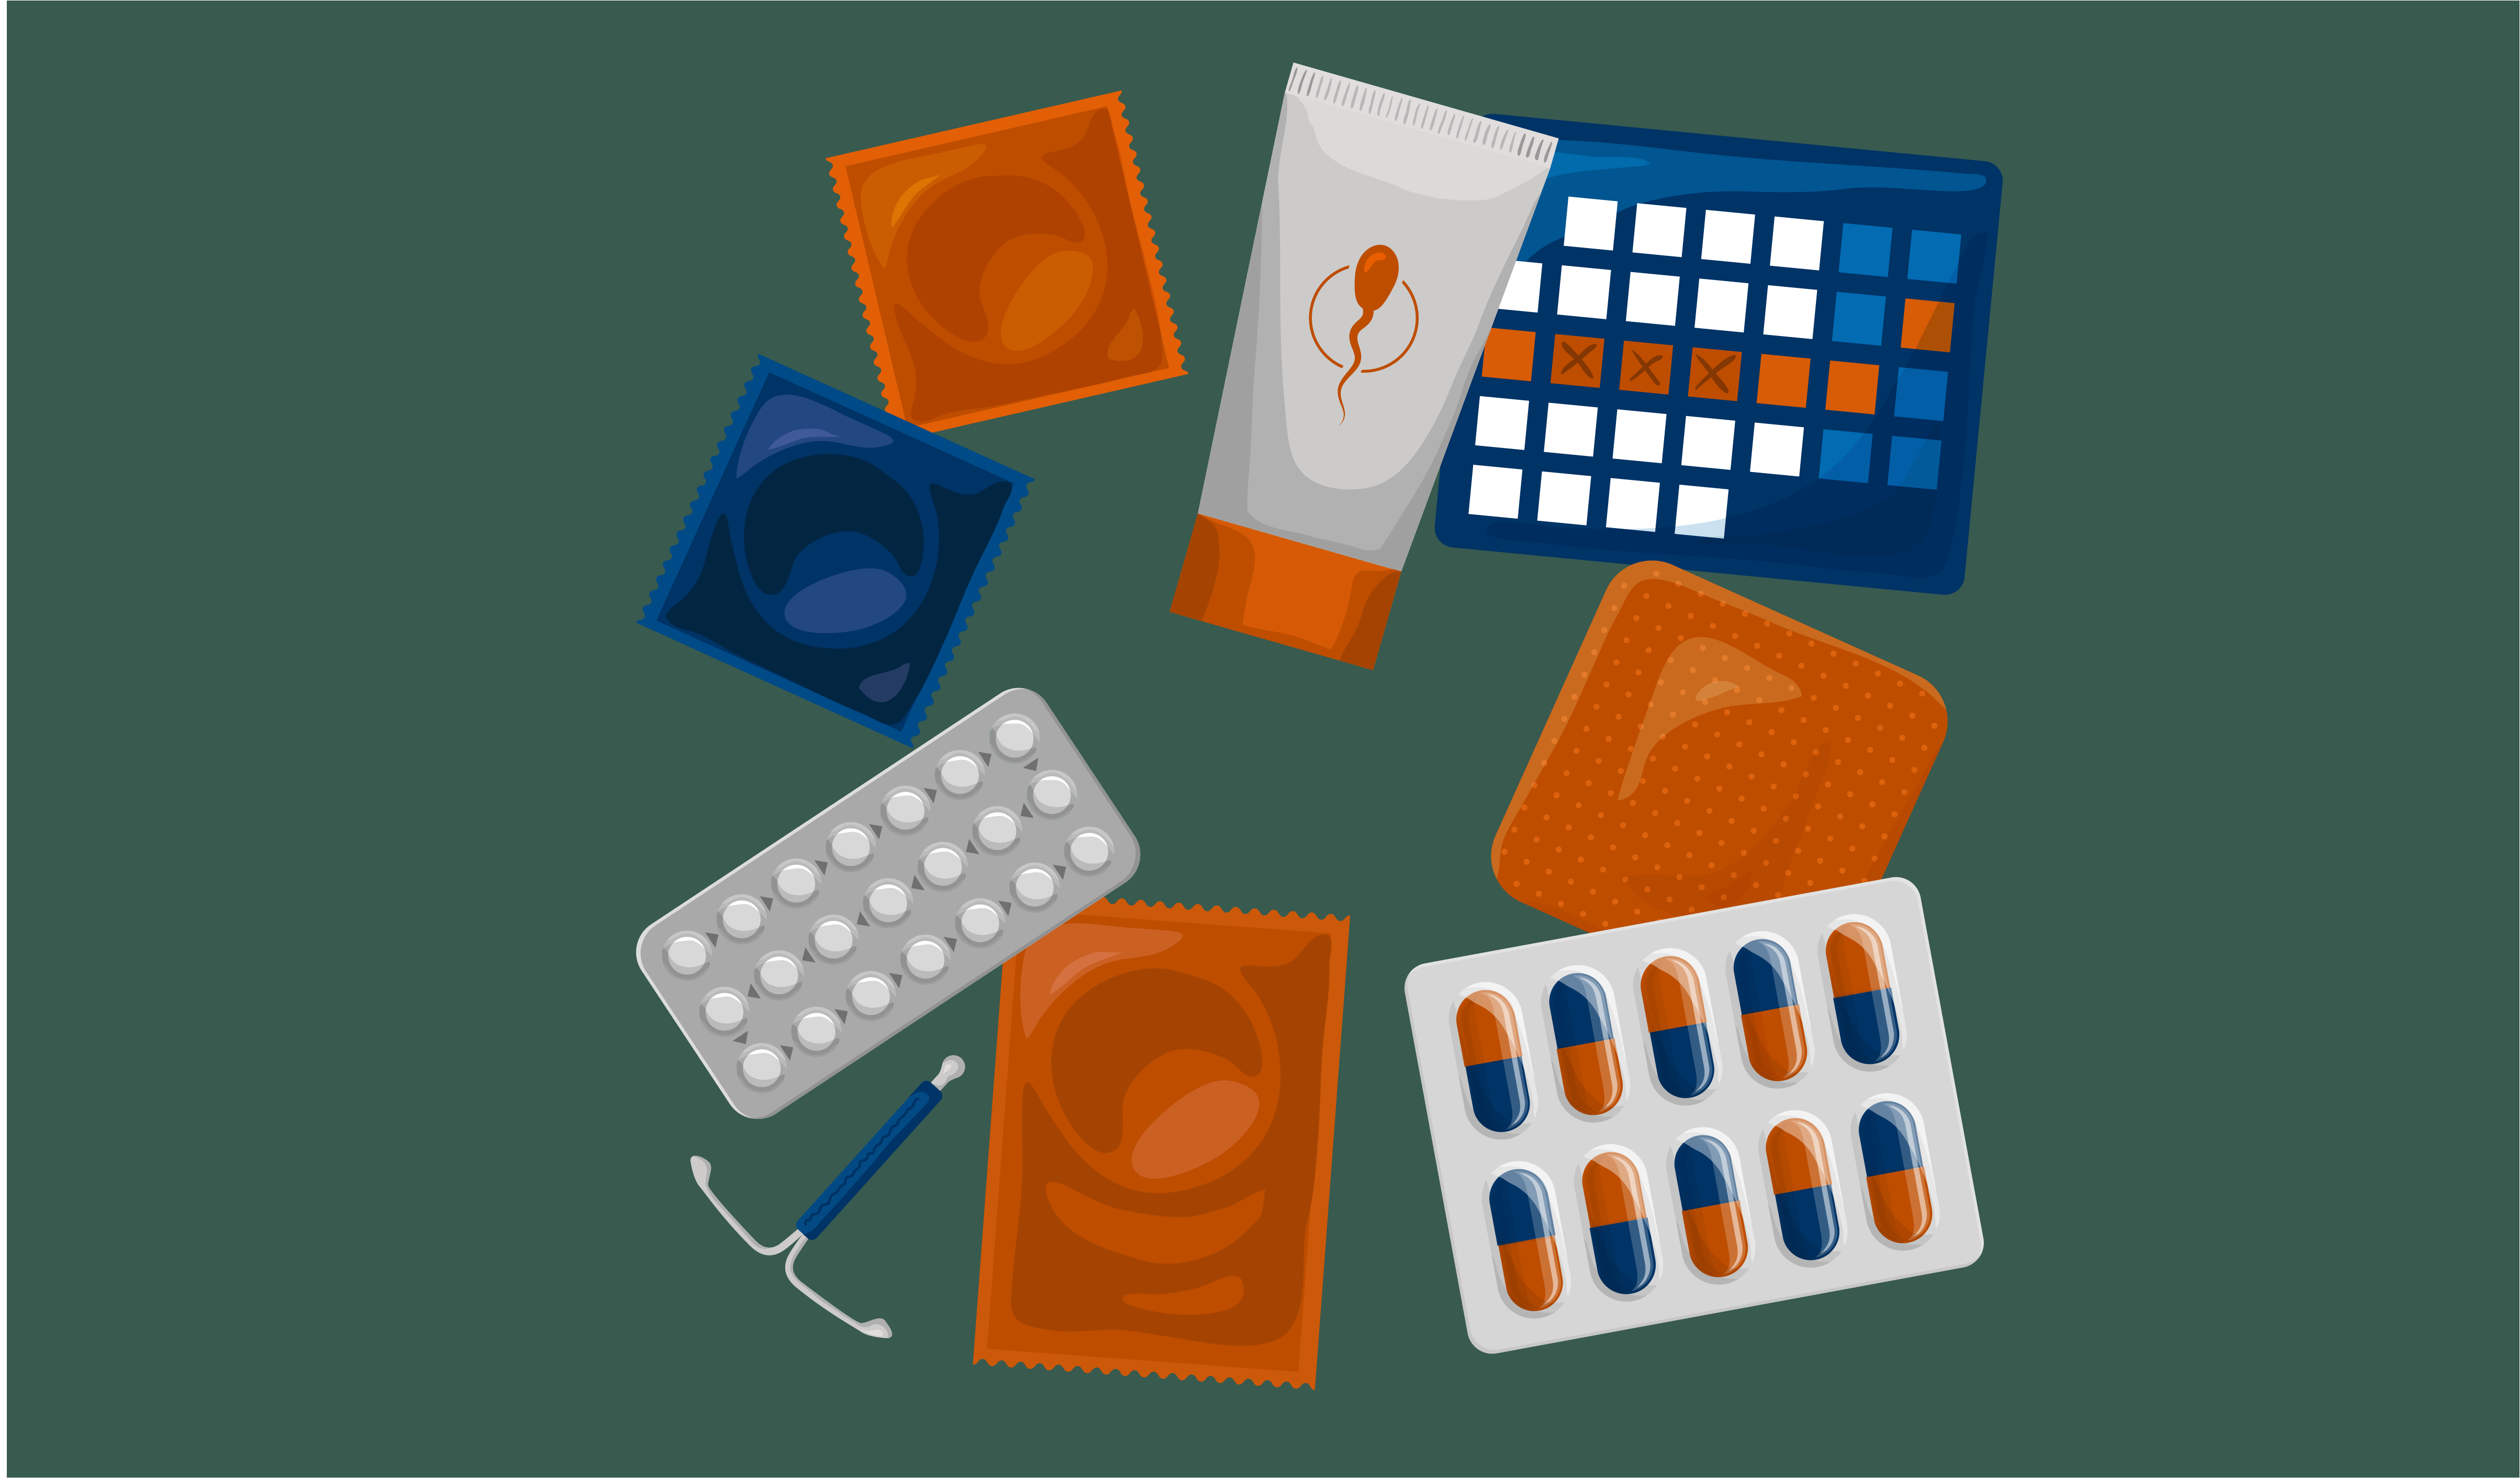 An illustration of various types of contraception